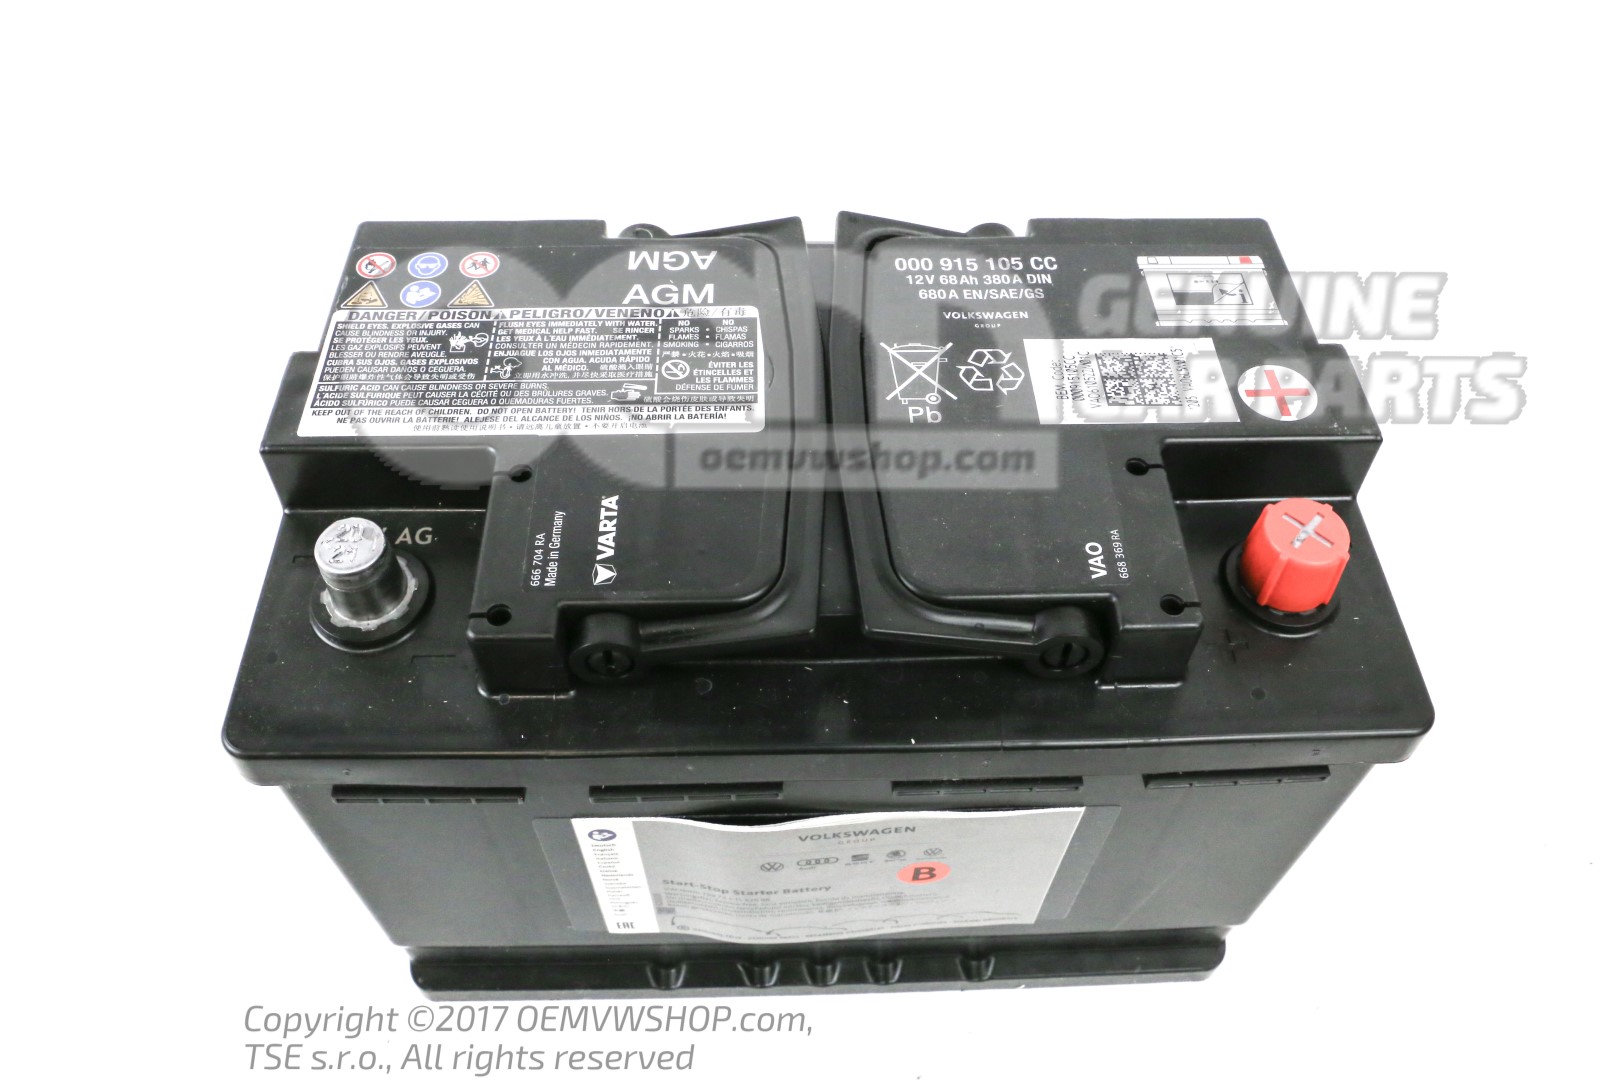 VW CC (358) Battery 7P0915105, 380A, 12V 18043938 - Used parts